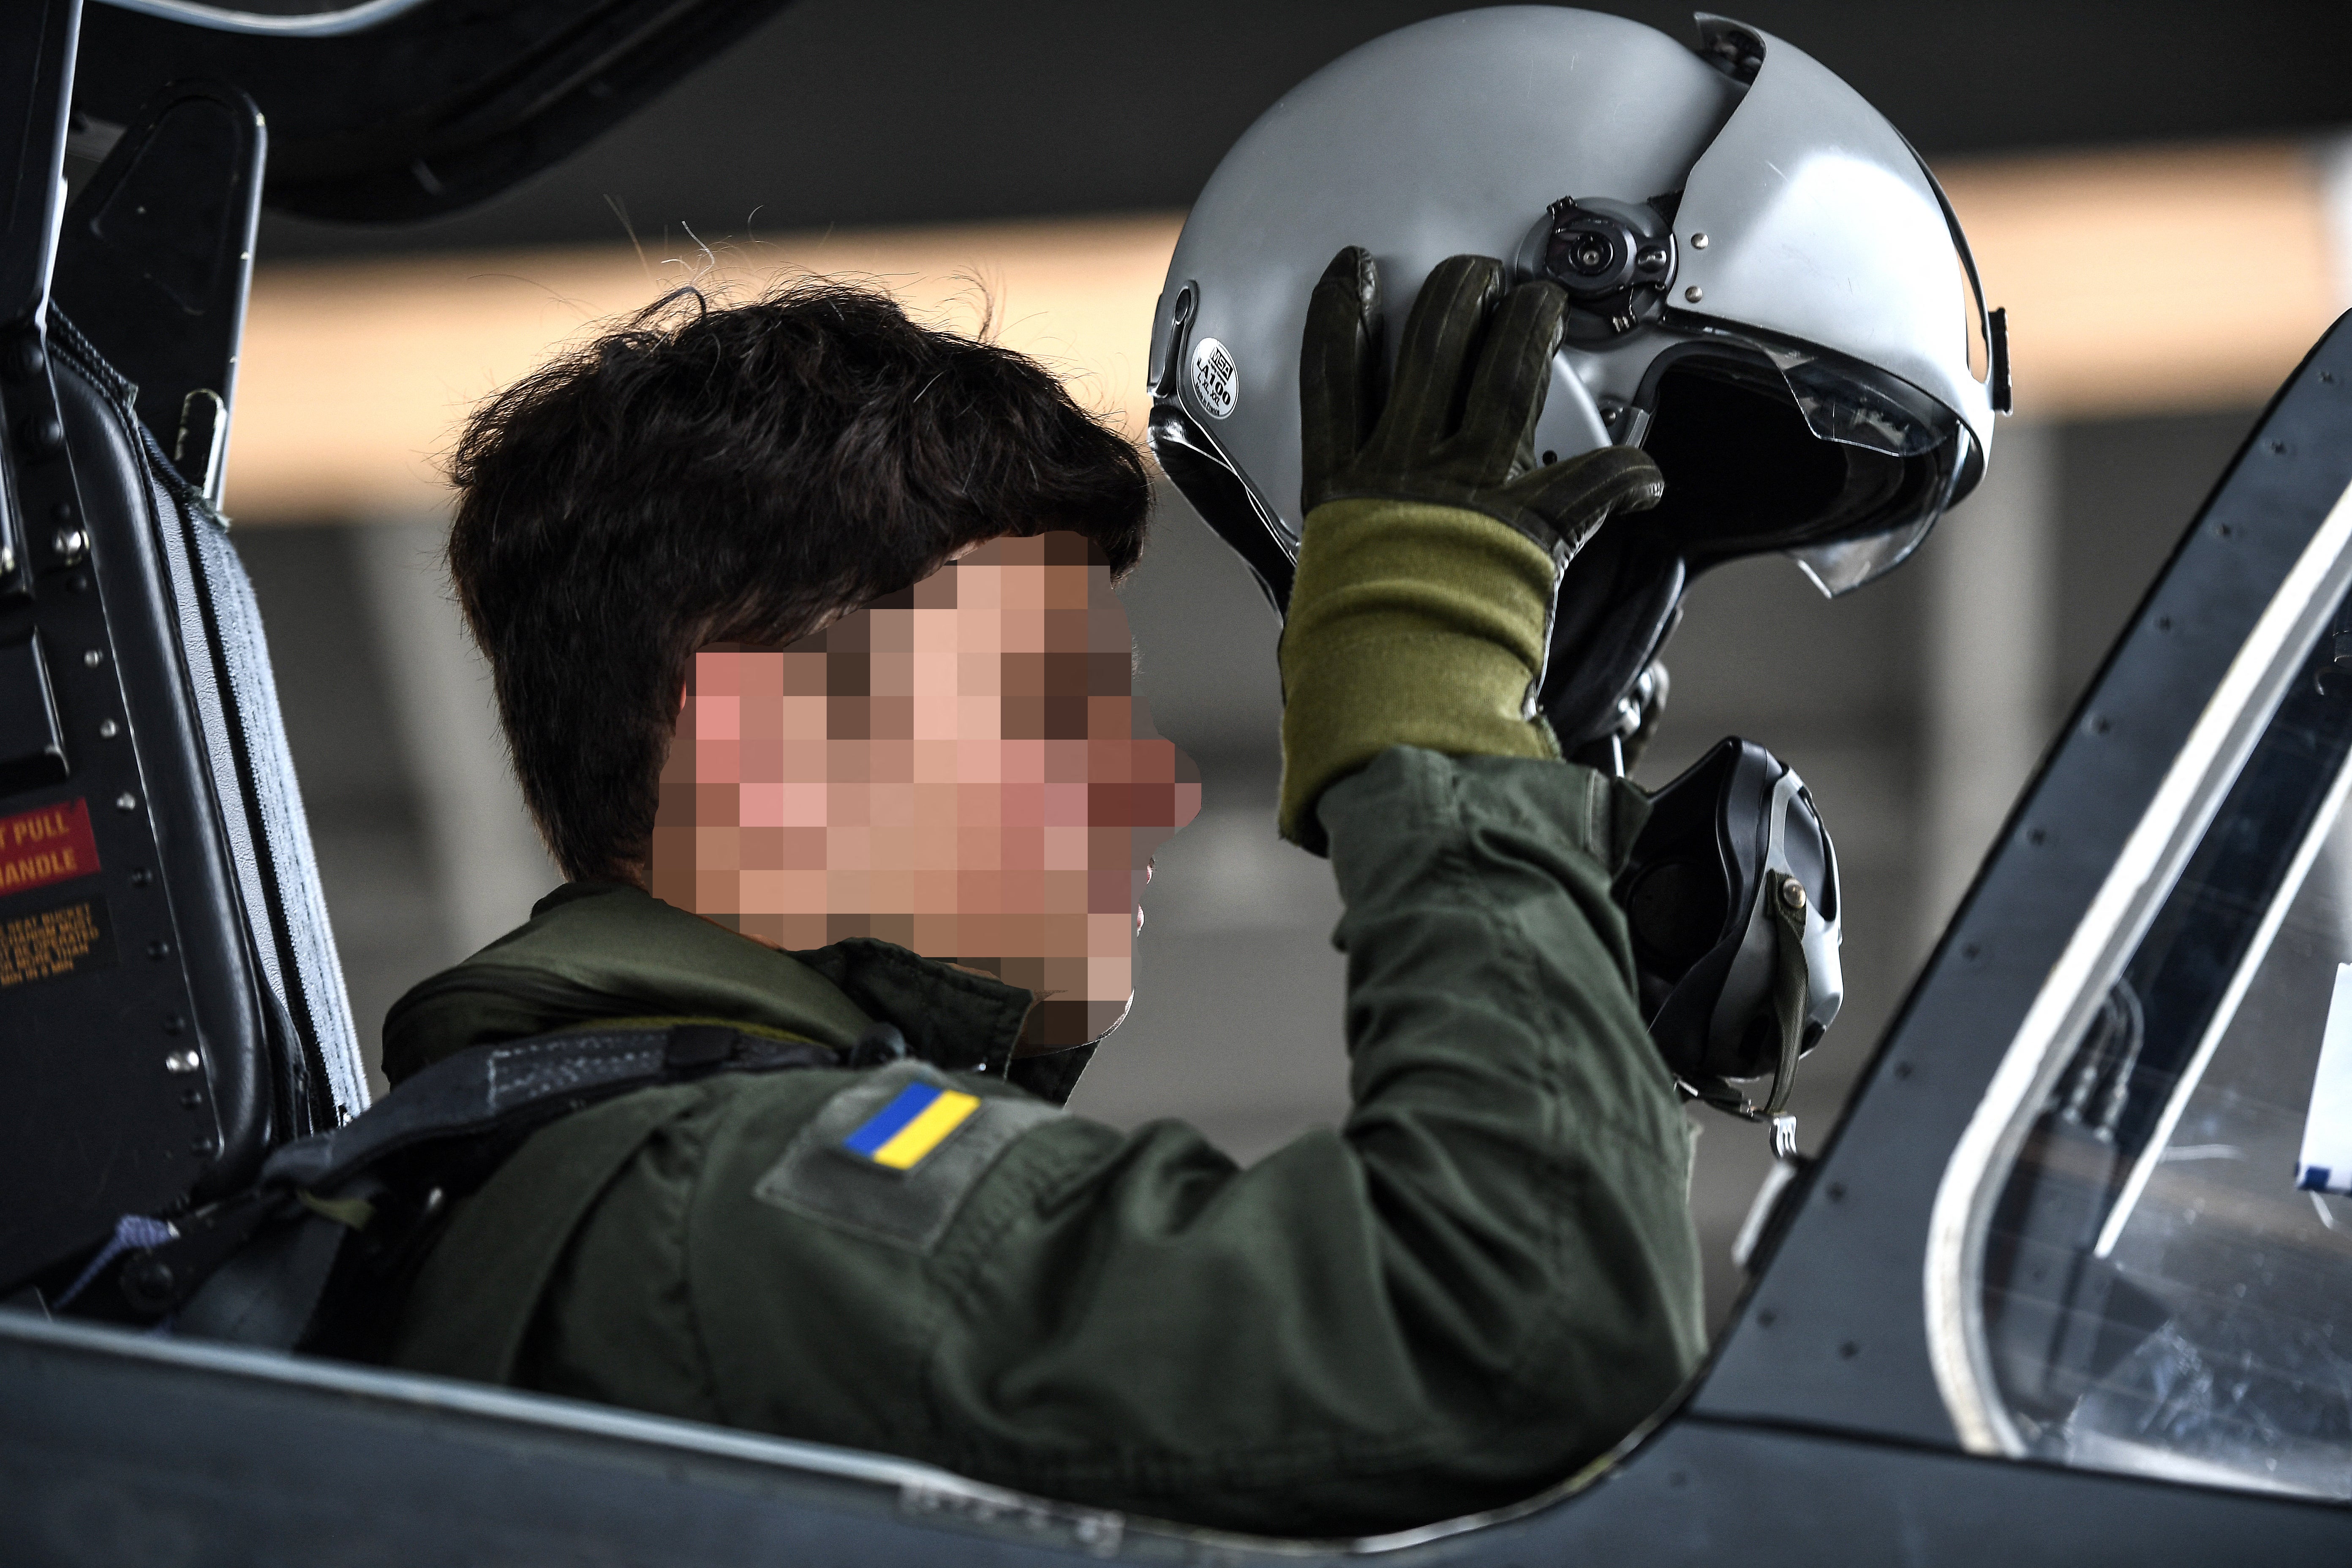 A Ukrainian trainee puts on his helmet ahead of a flight with an unseen French military instructor onboard an Alpha Jet fighter jet, at a French Army air base in south-western France